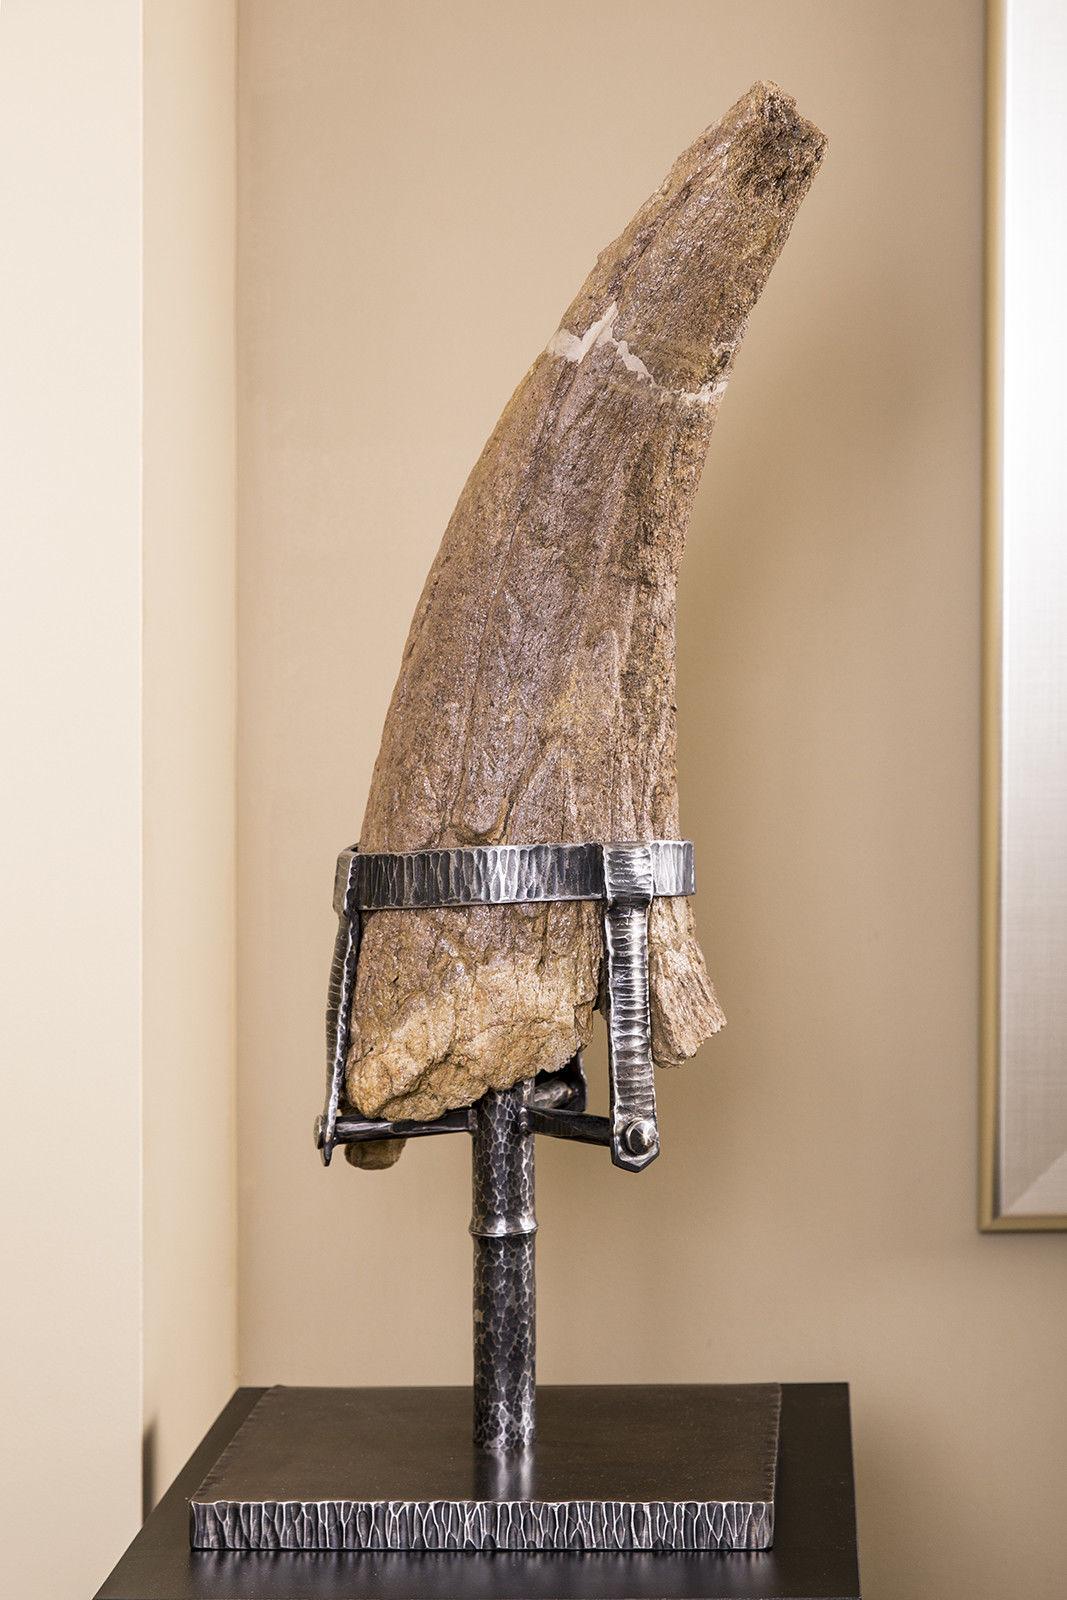 You are looking at an authentic triceratops horn that was found in Hell Creek.   This piece was further authenticated by Dr Bruce Erickson who was best known for finding one of the most complete tricertops skeltons' known to exist.  We personally